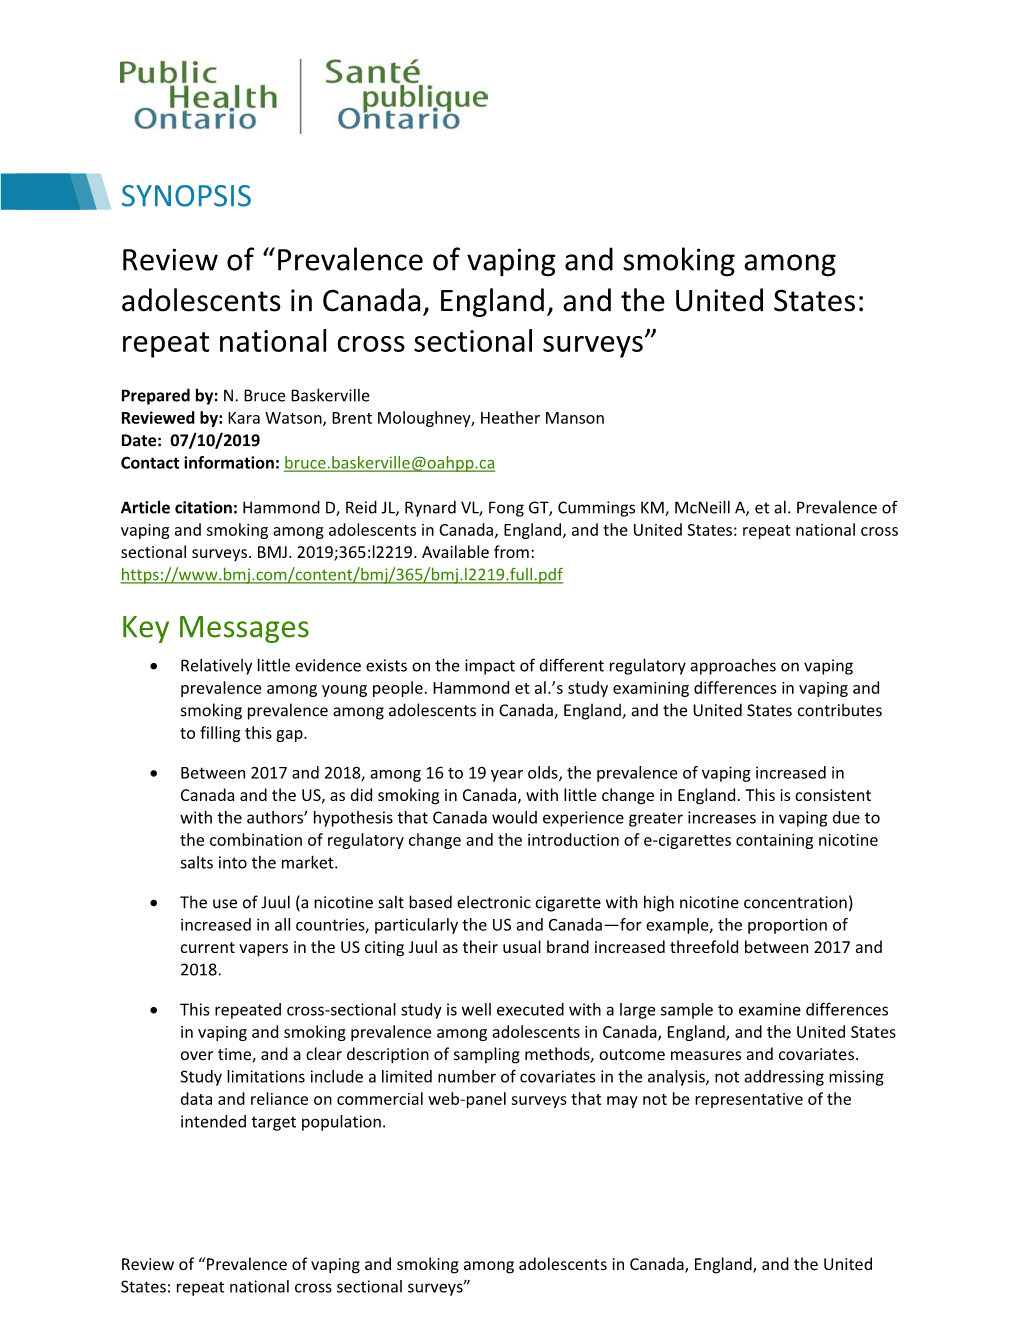 Prevalence of Vaping and Smoking Among Adolescents in Canada, England, and the United States: Repeat National Cross Sectional Surveys”